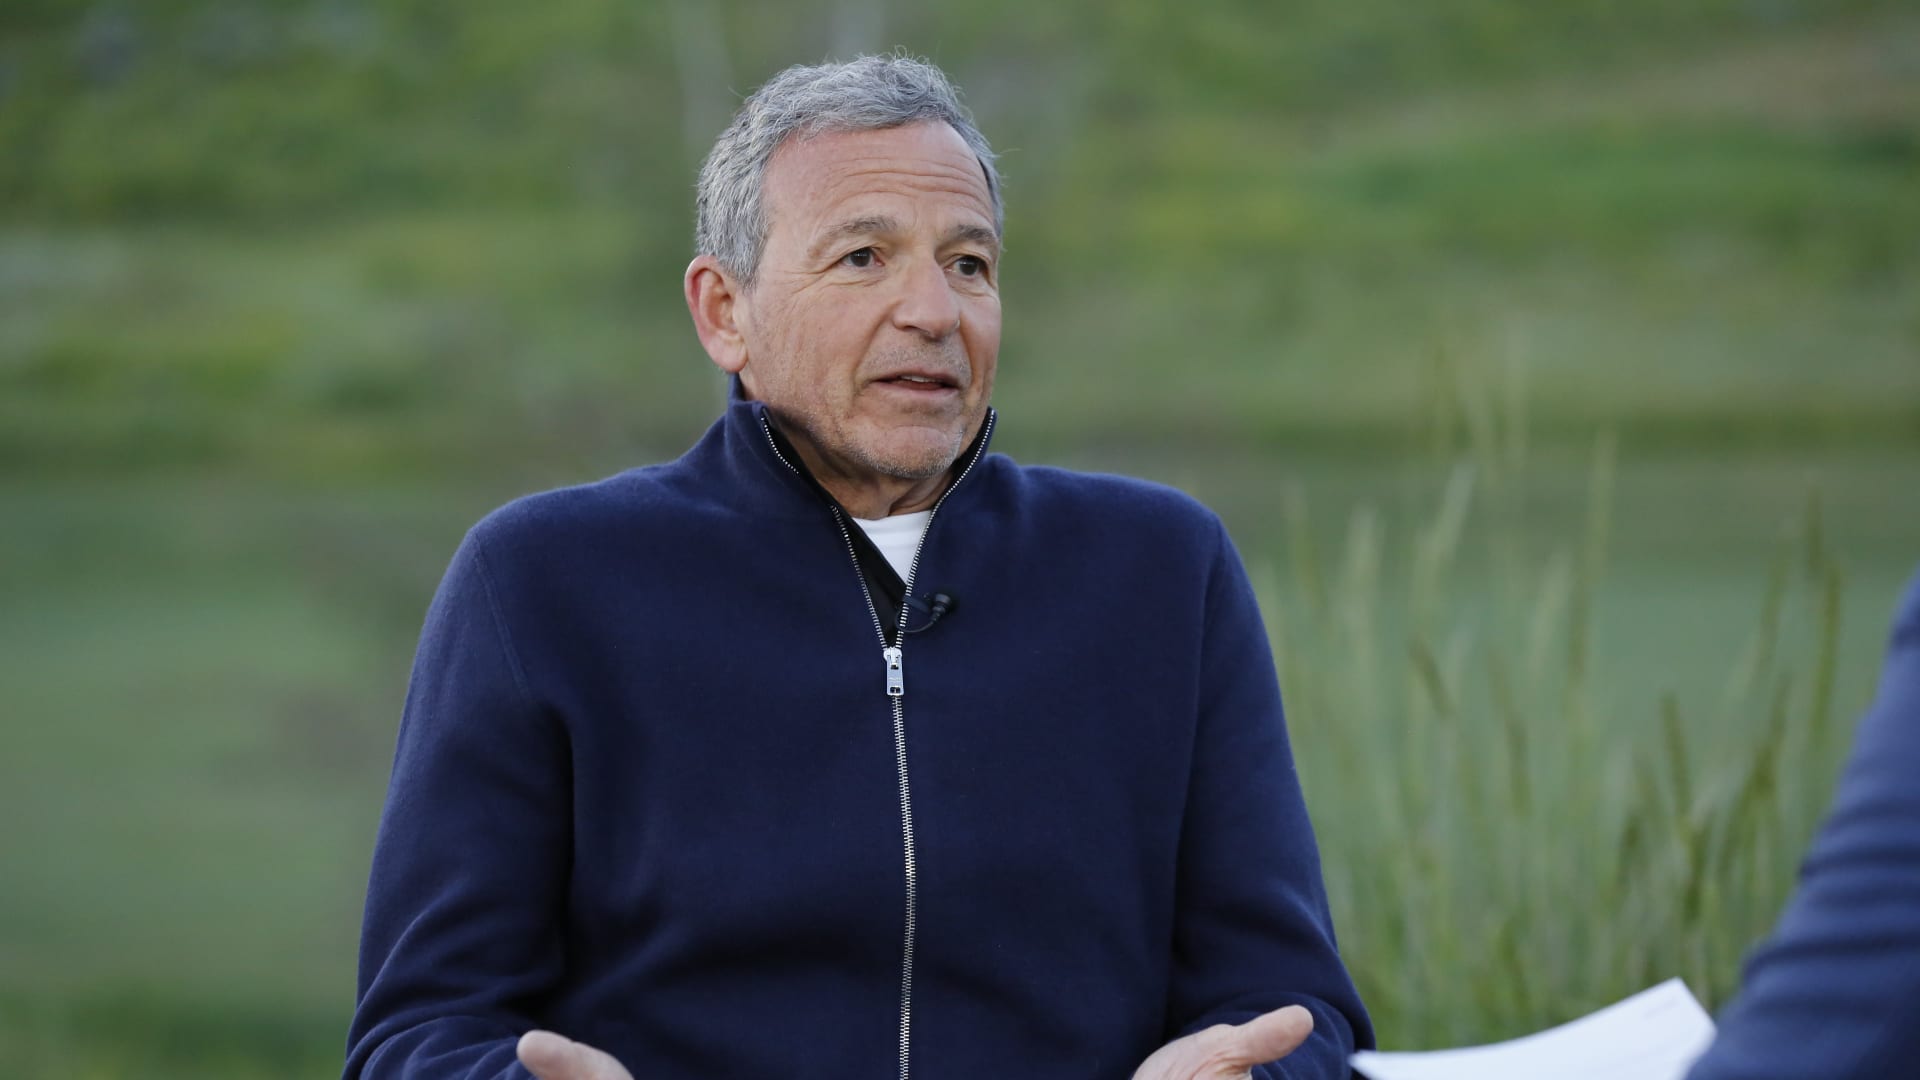 Disney CEO Bob Iger wants minority partners for ESPN, but landing a deal won't be easy